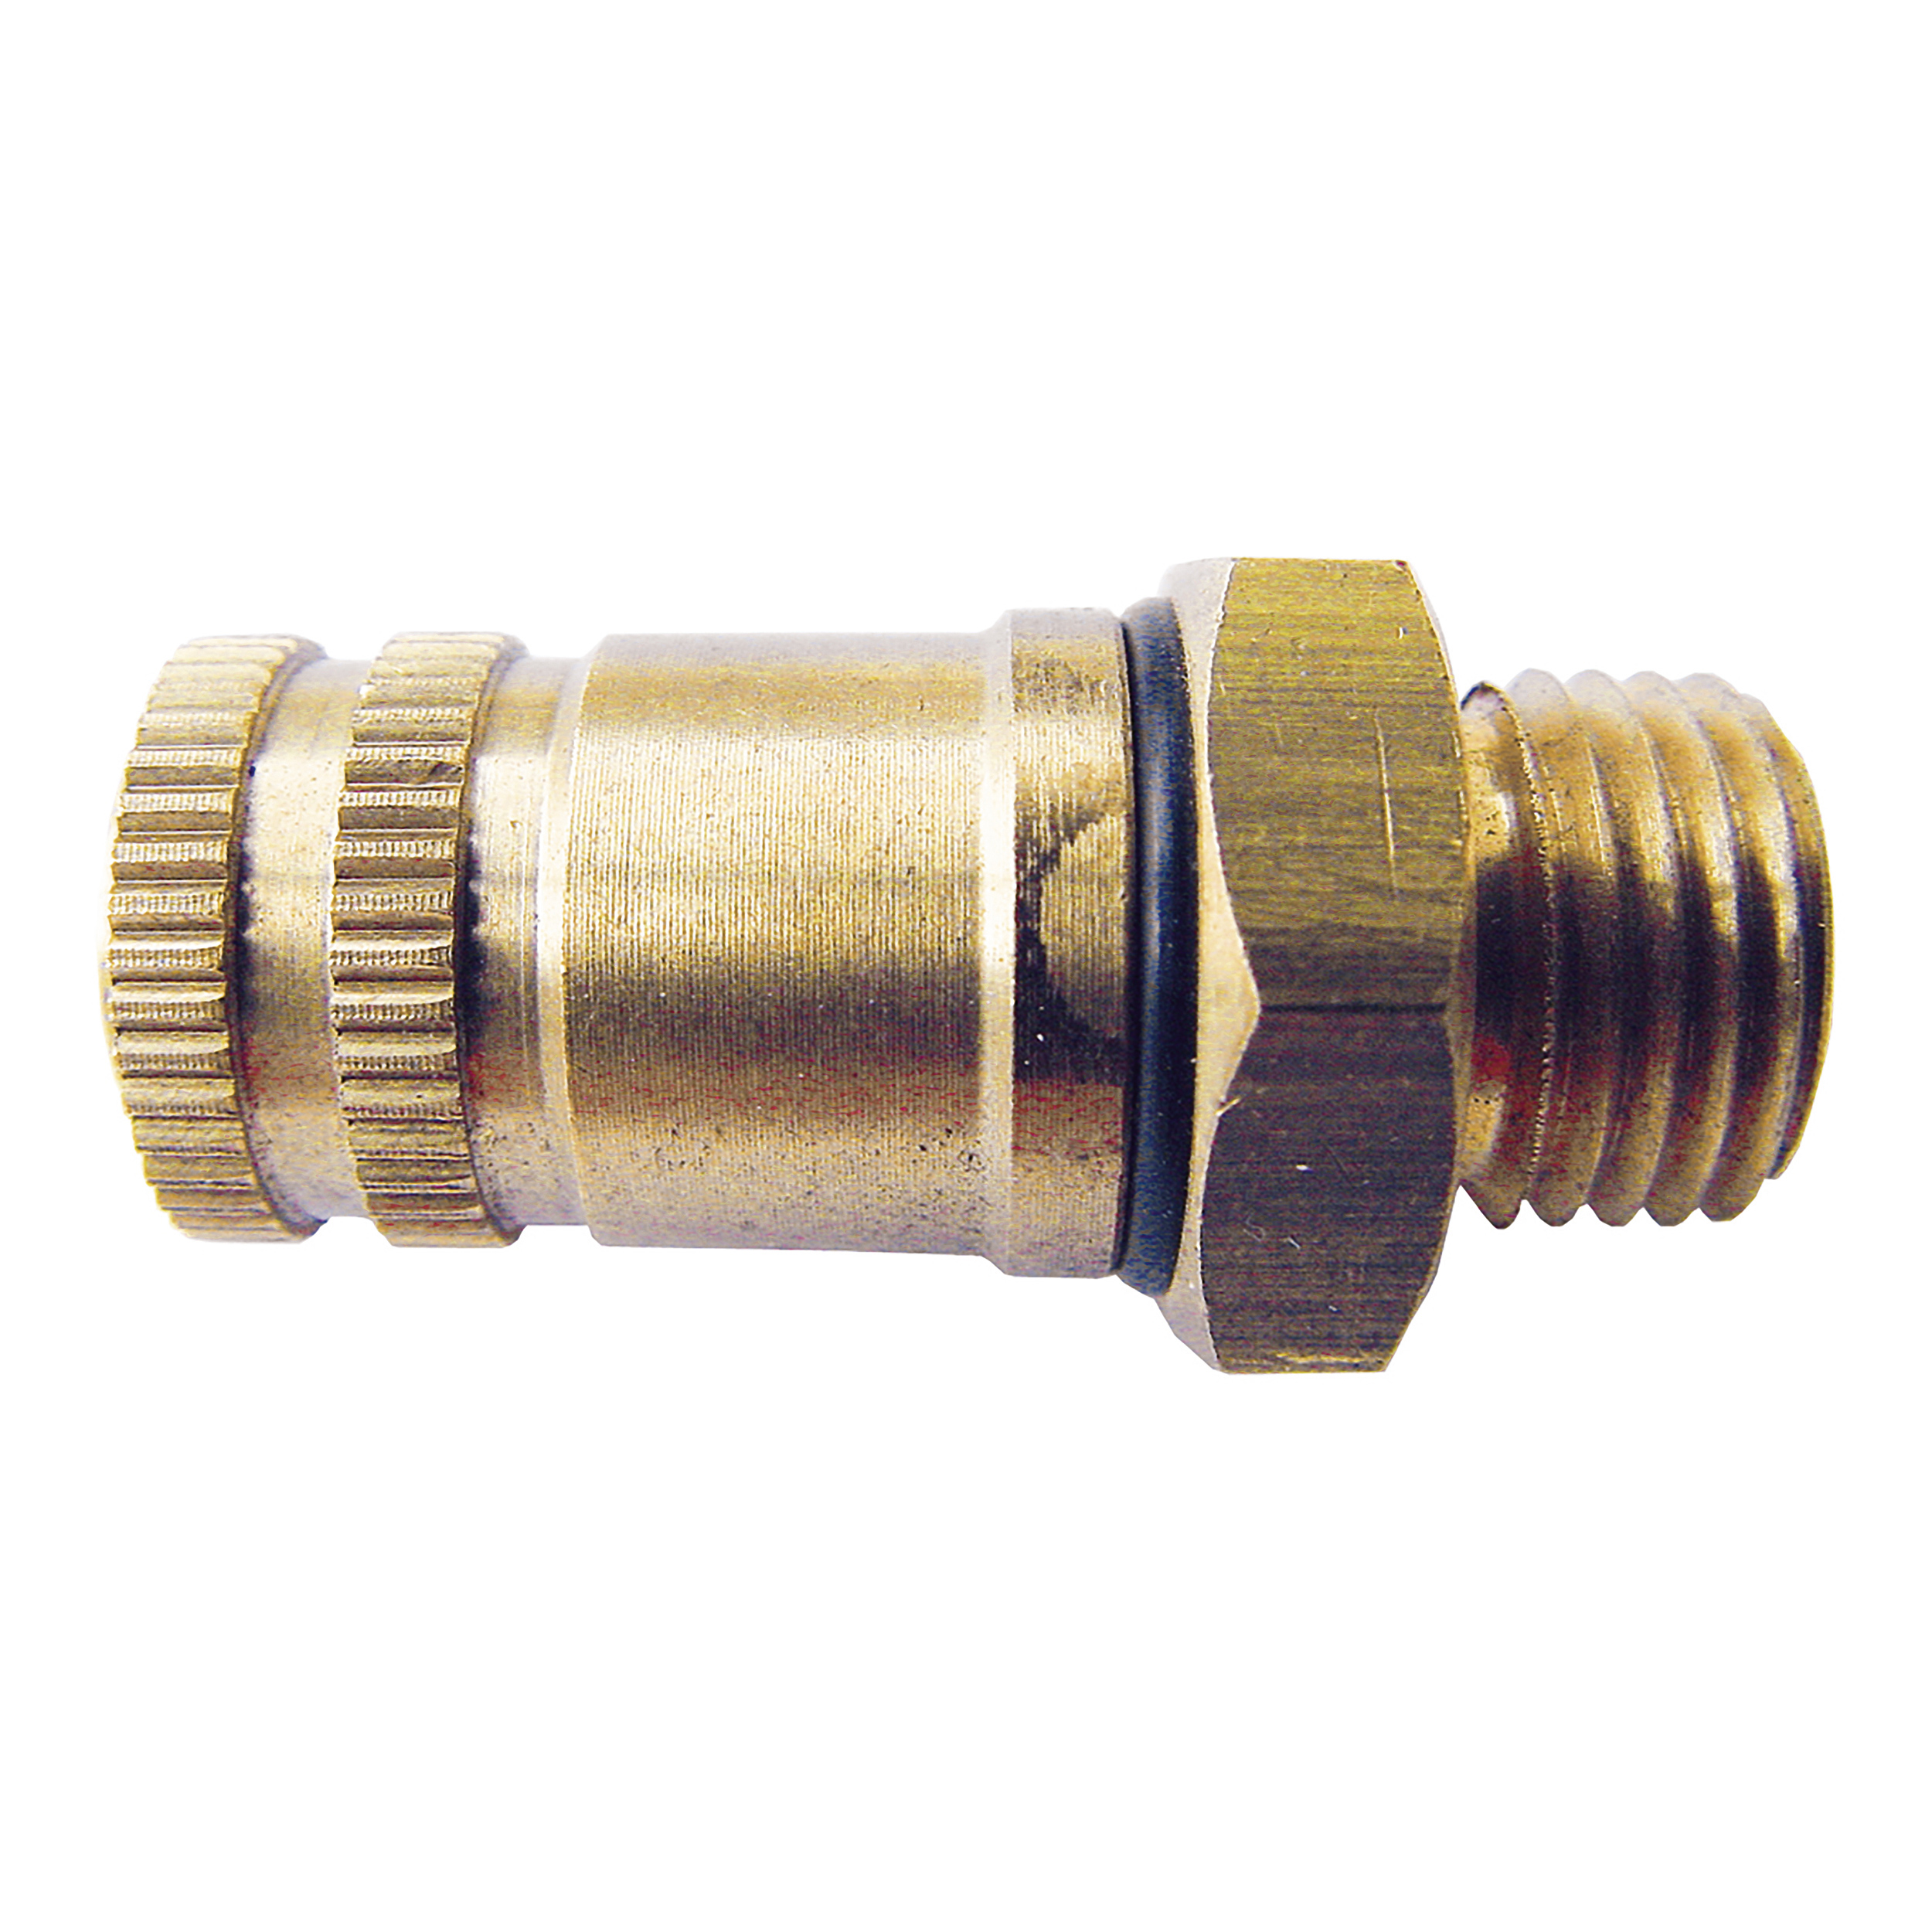 Spray adapter for spray guns, complete, nozzle included: Ø0.7 mm, with spin insert, material: brass